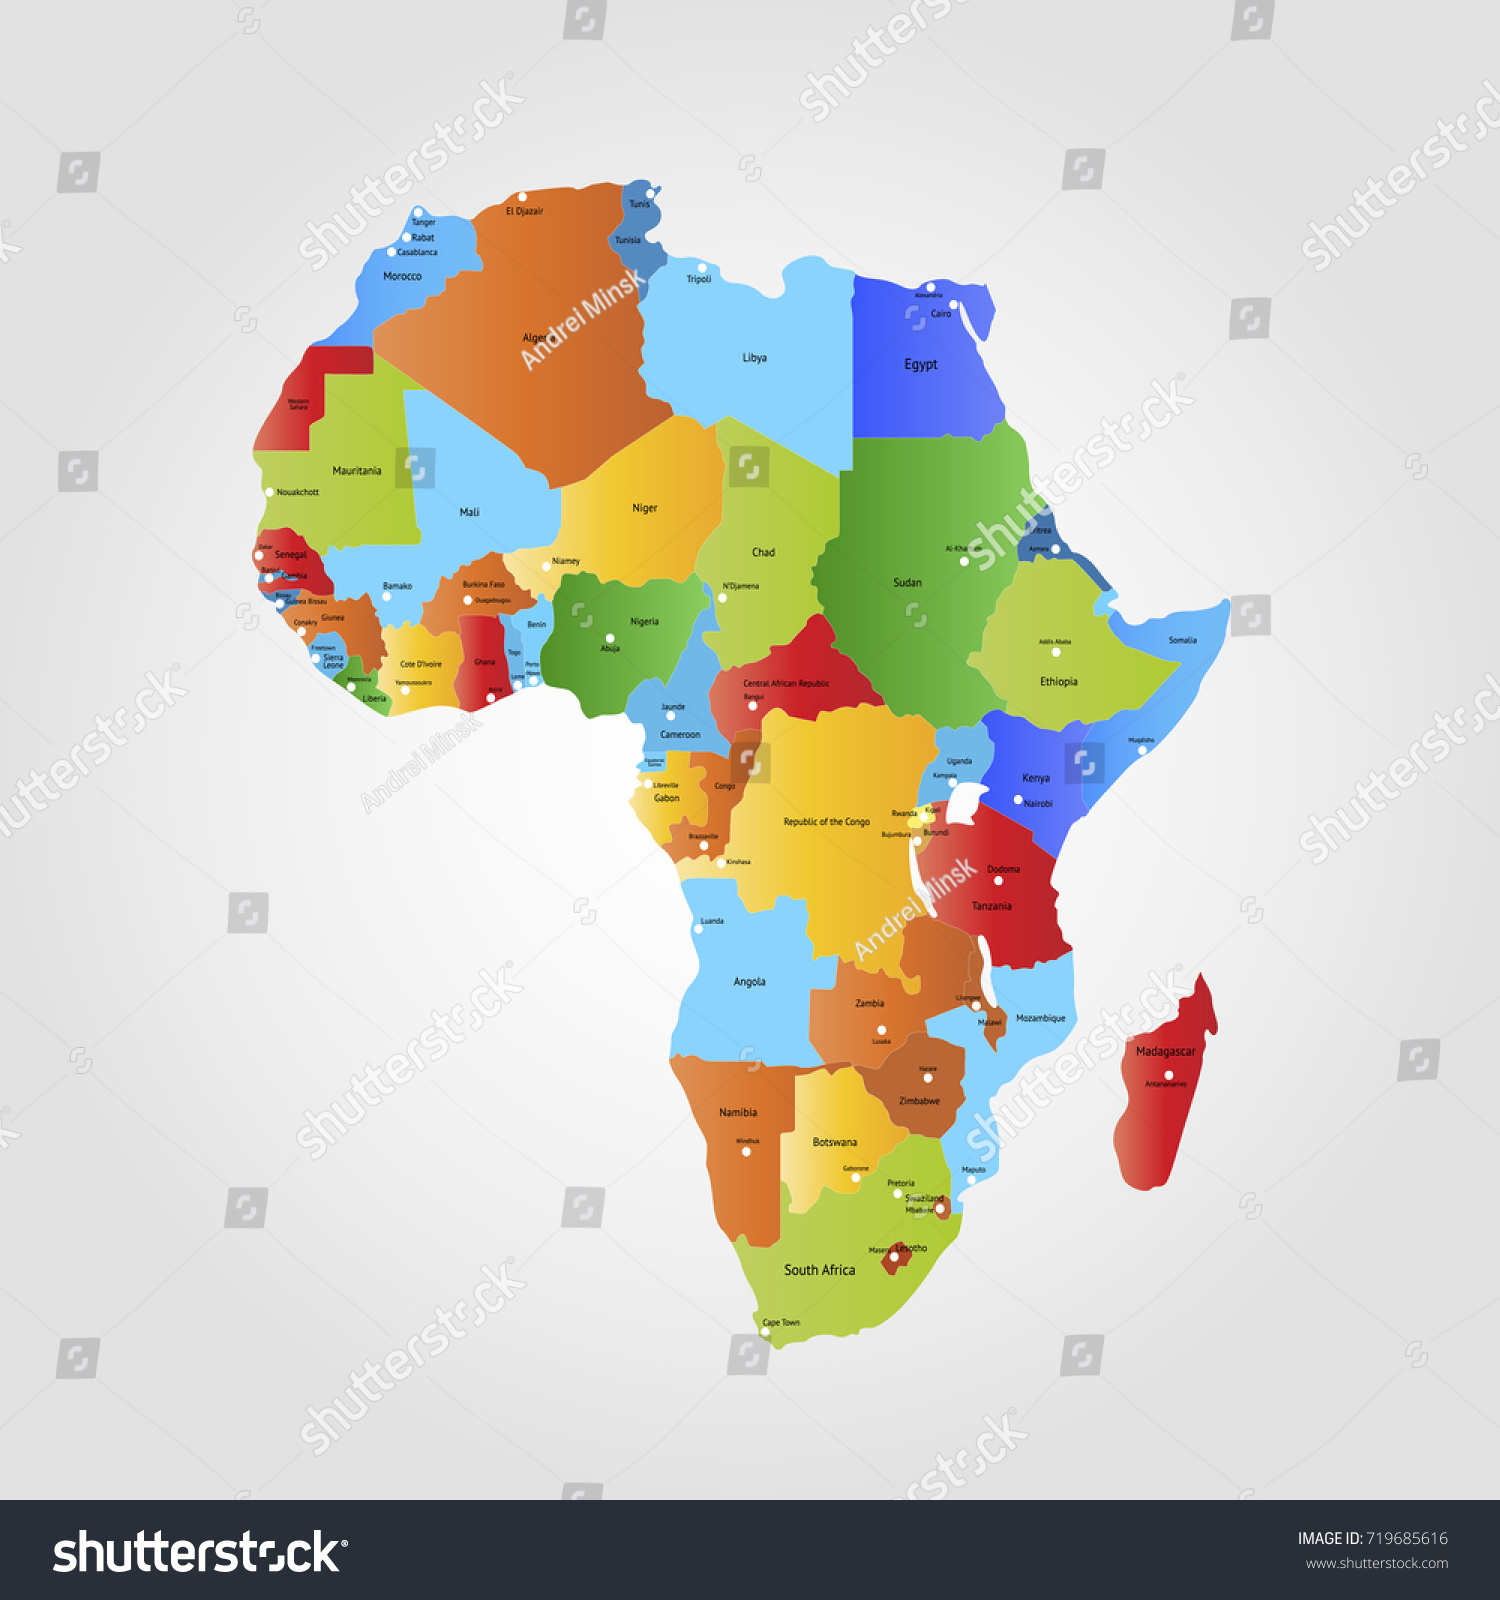 Map Of Africa Royalty Free Stock Vector 719685616 9477